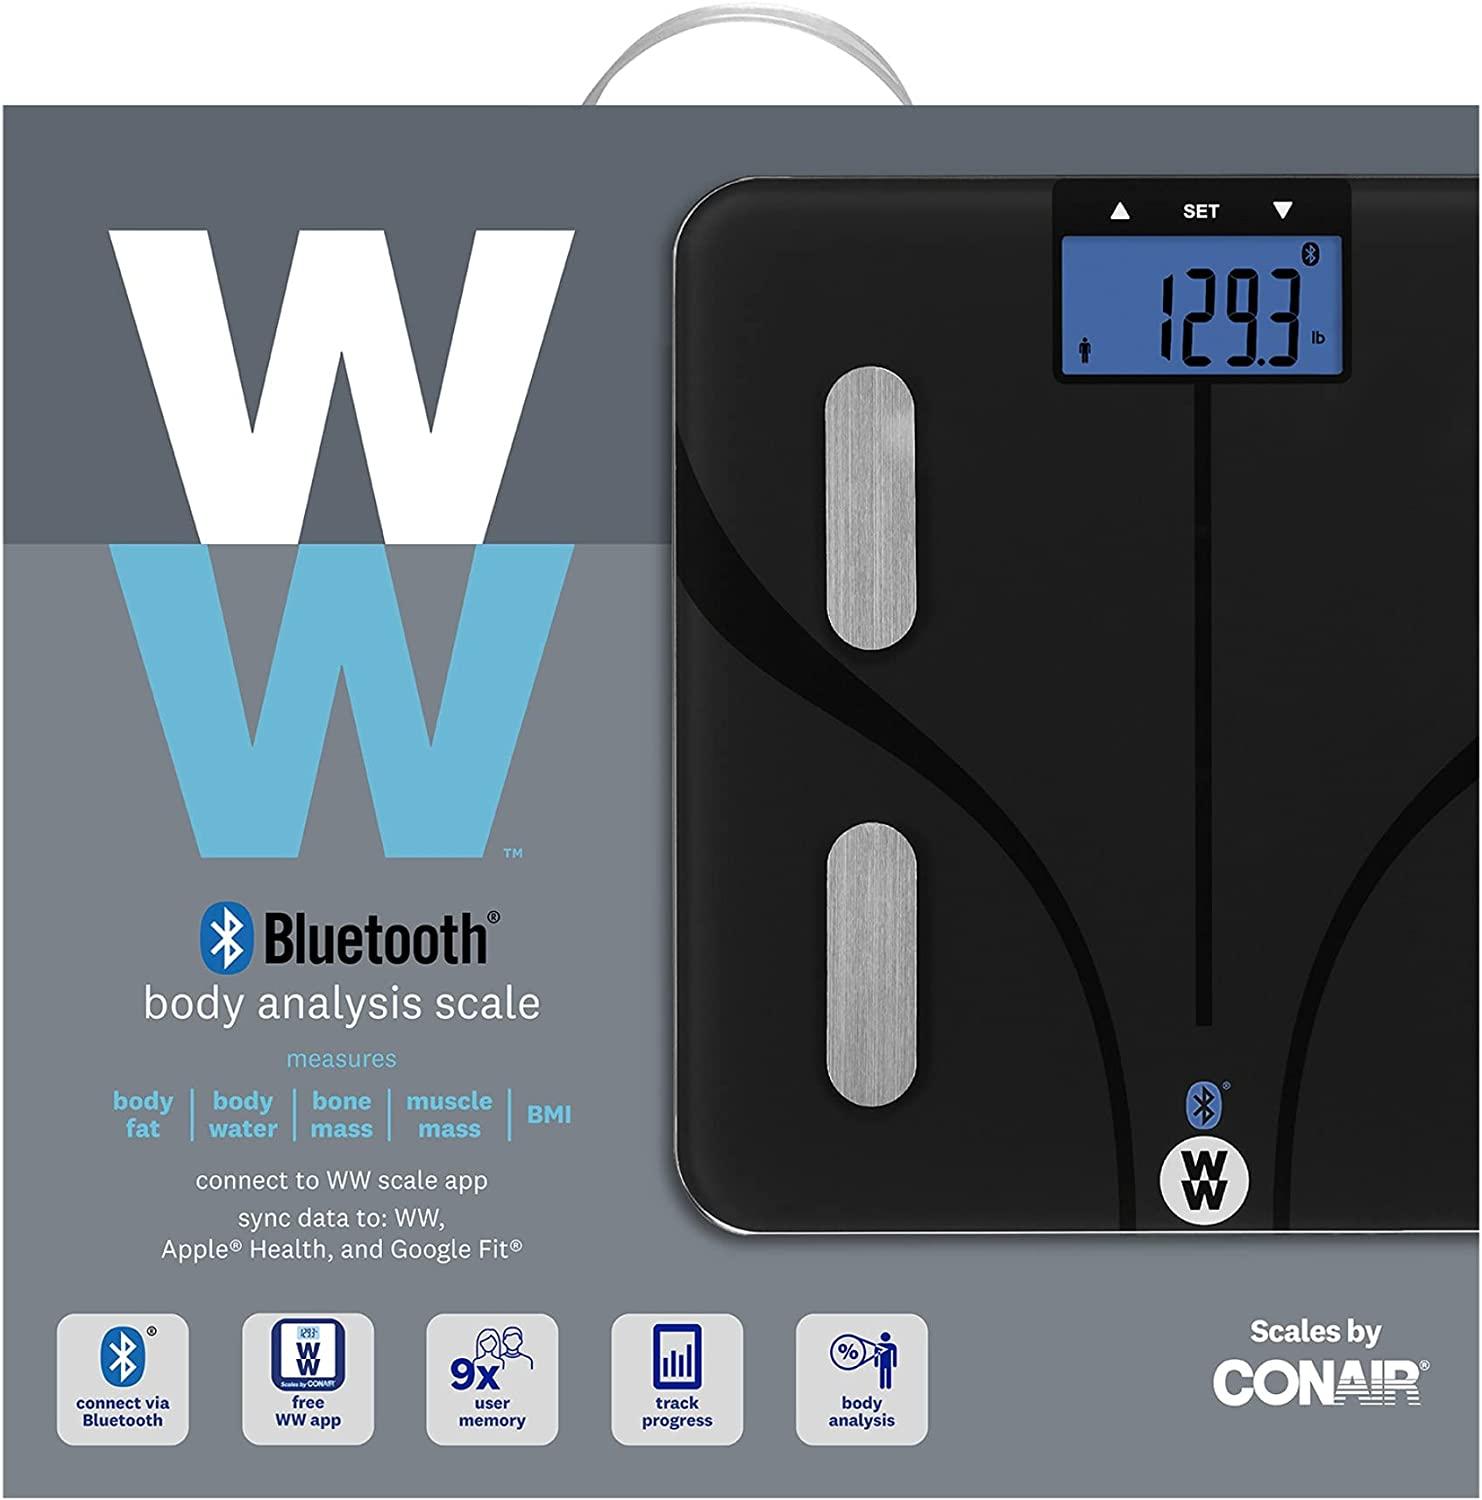 WW Bluetooth (Smart) Body Analysis Scale-Conair-Weight/Fat/Water